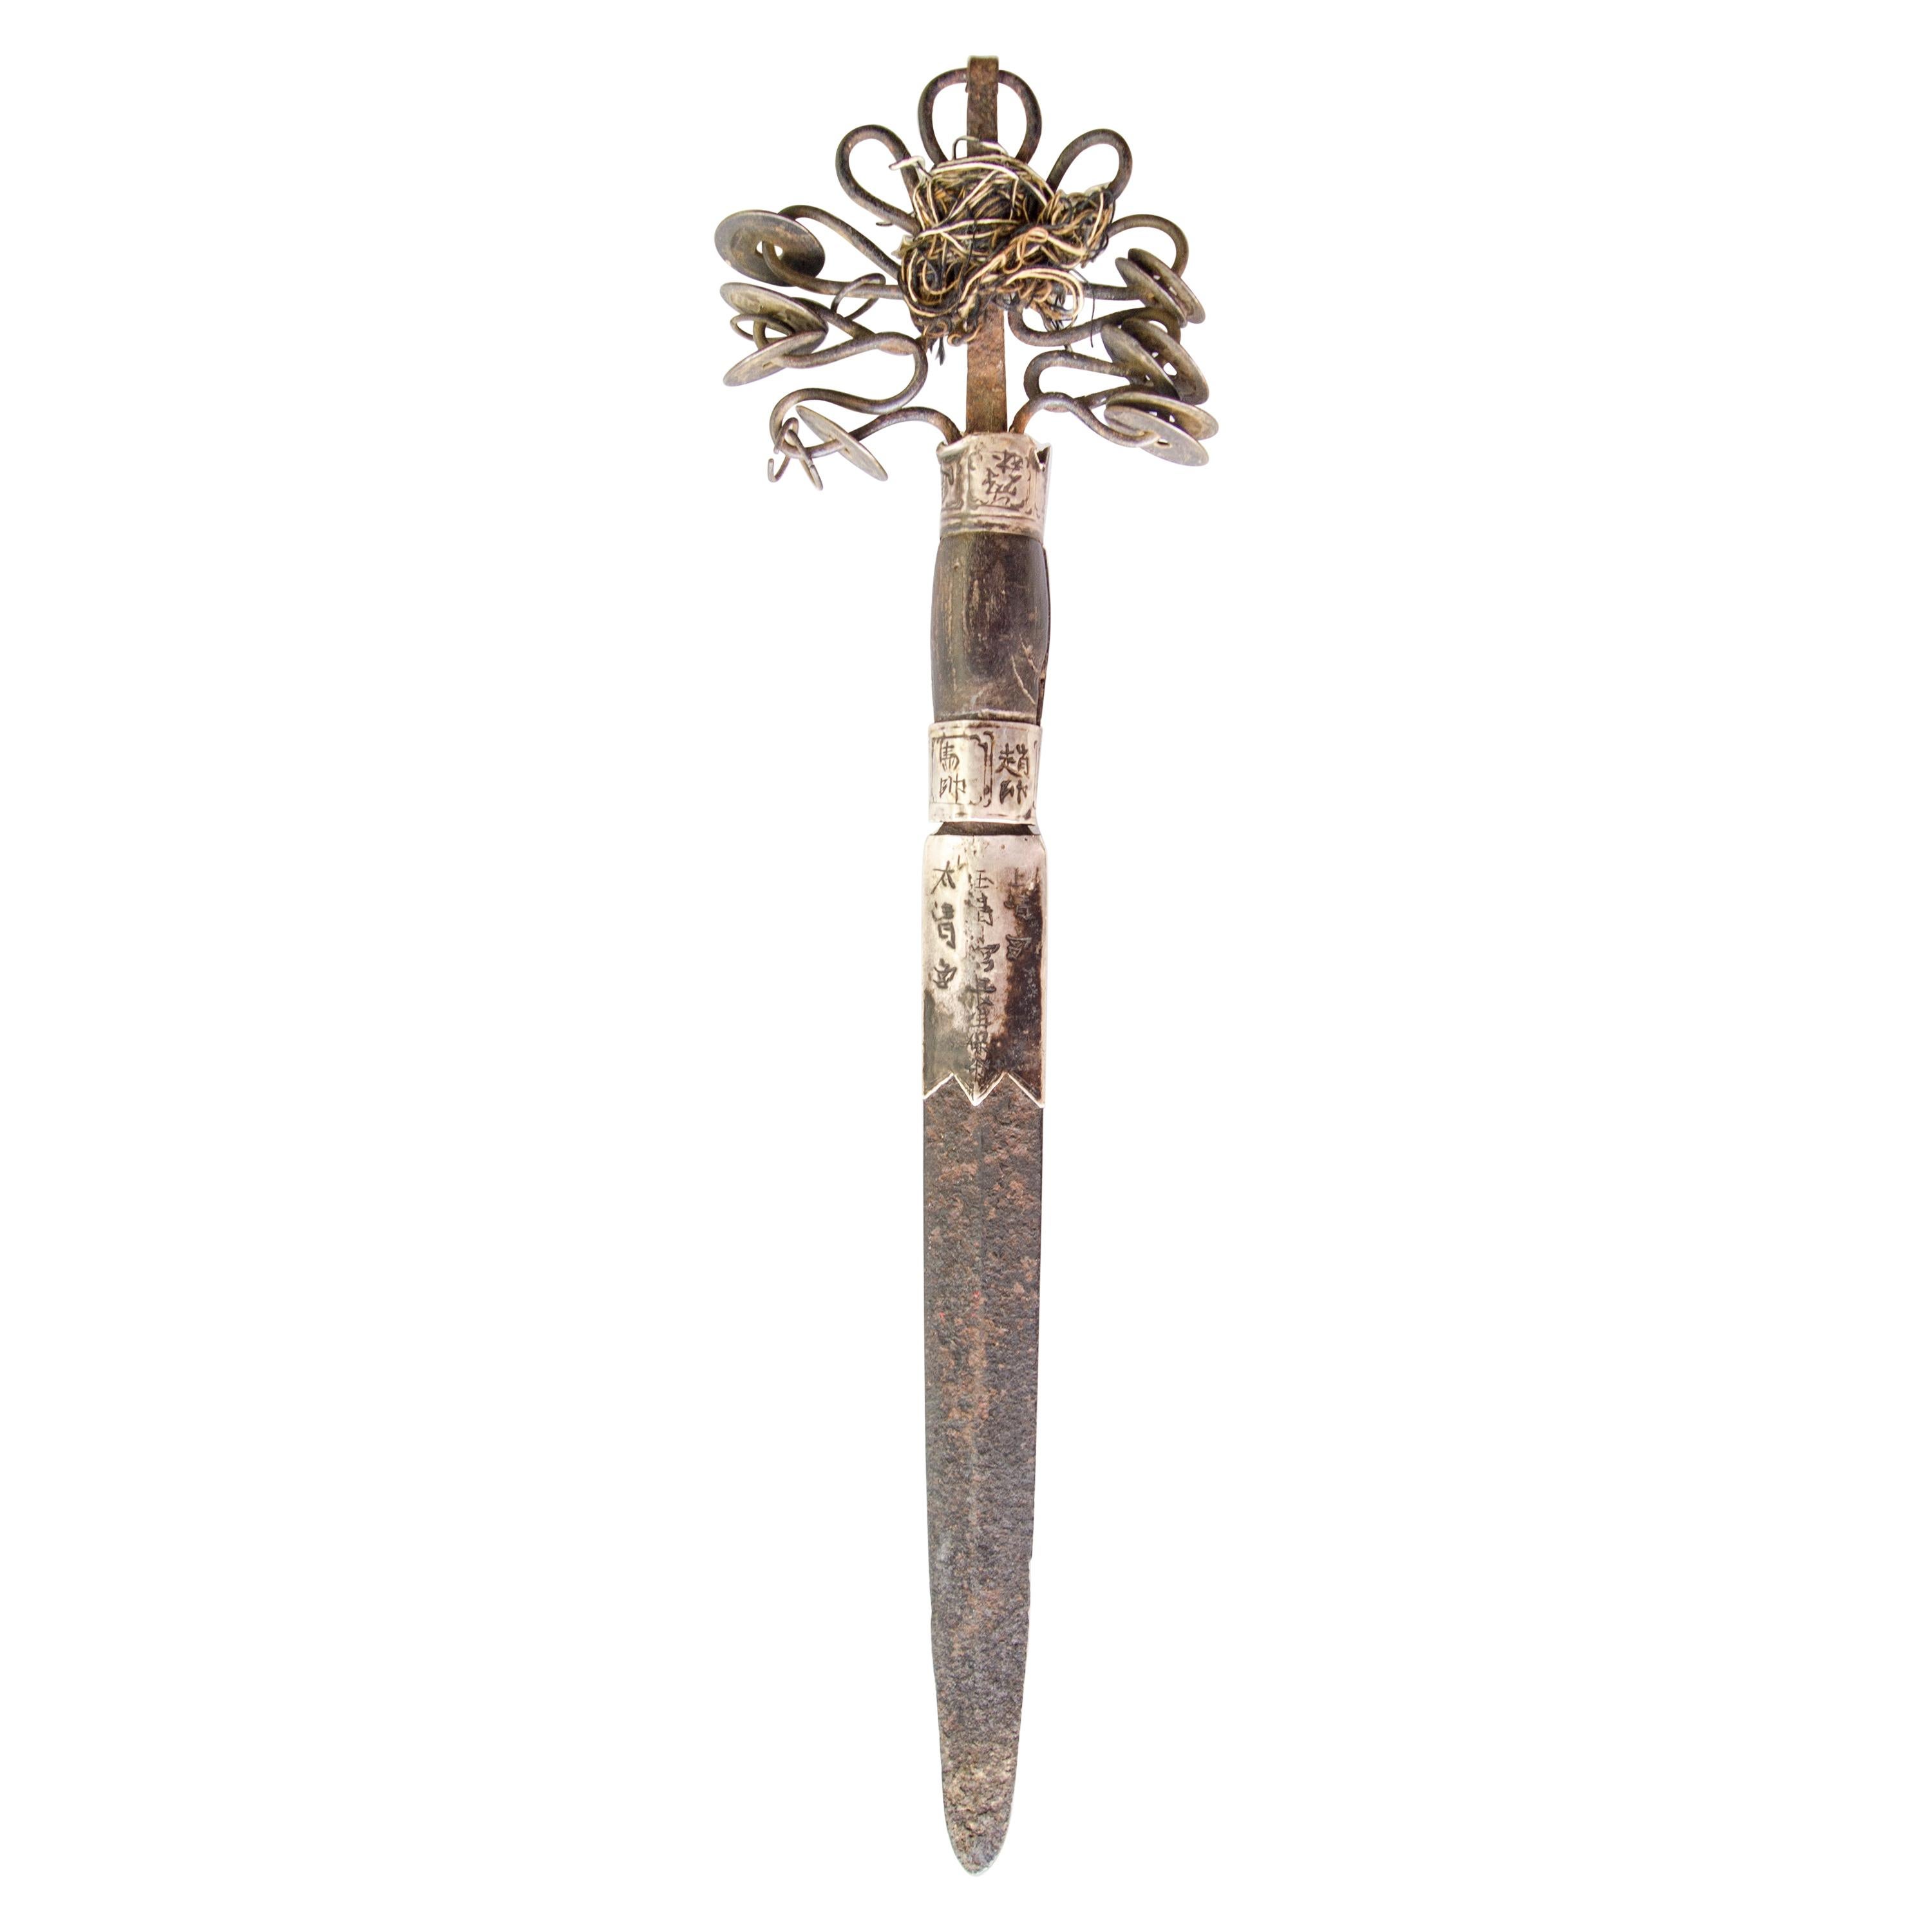 Yao Ritual Dagger Iron with Coins and Silver Banding Vietnam, Early 20th Century